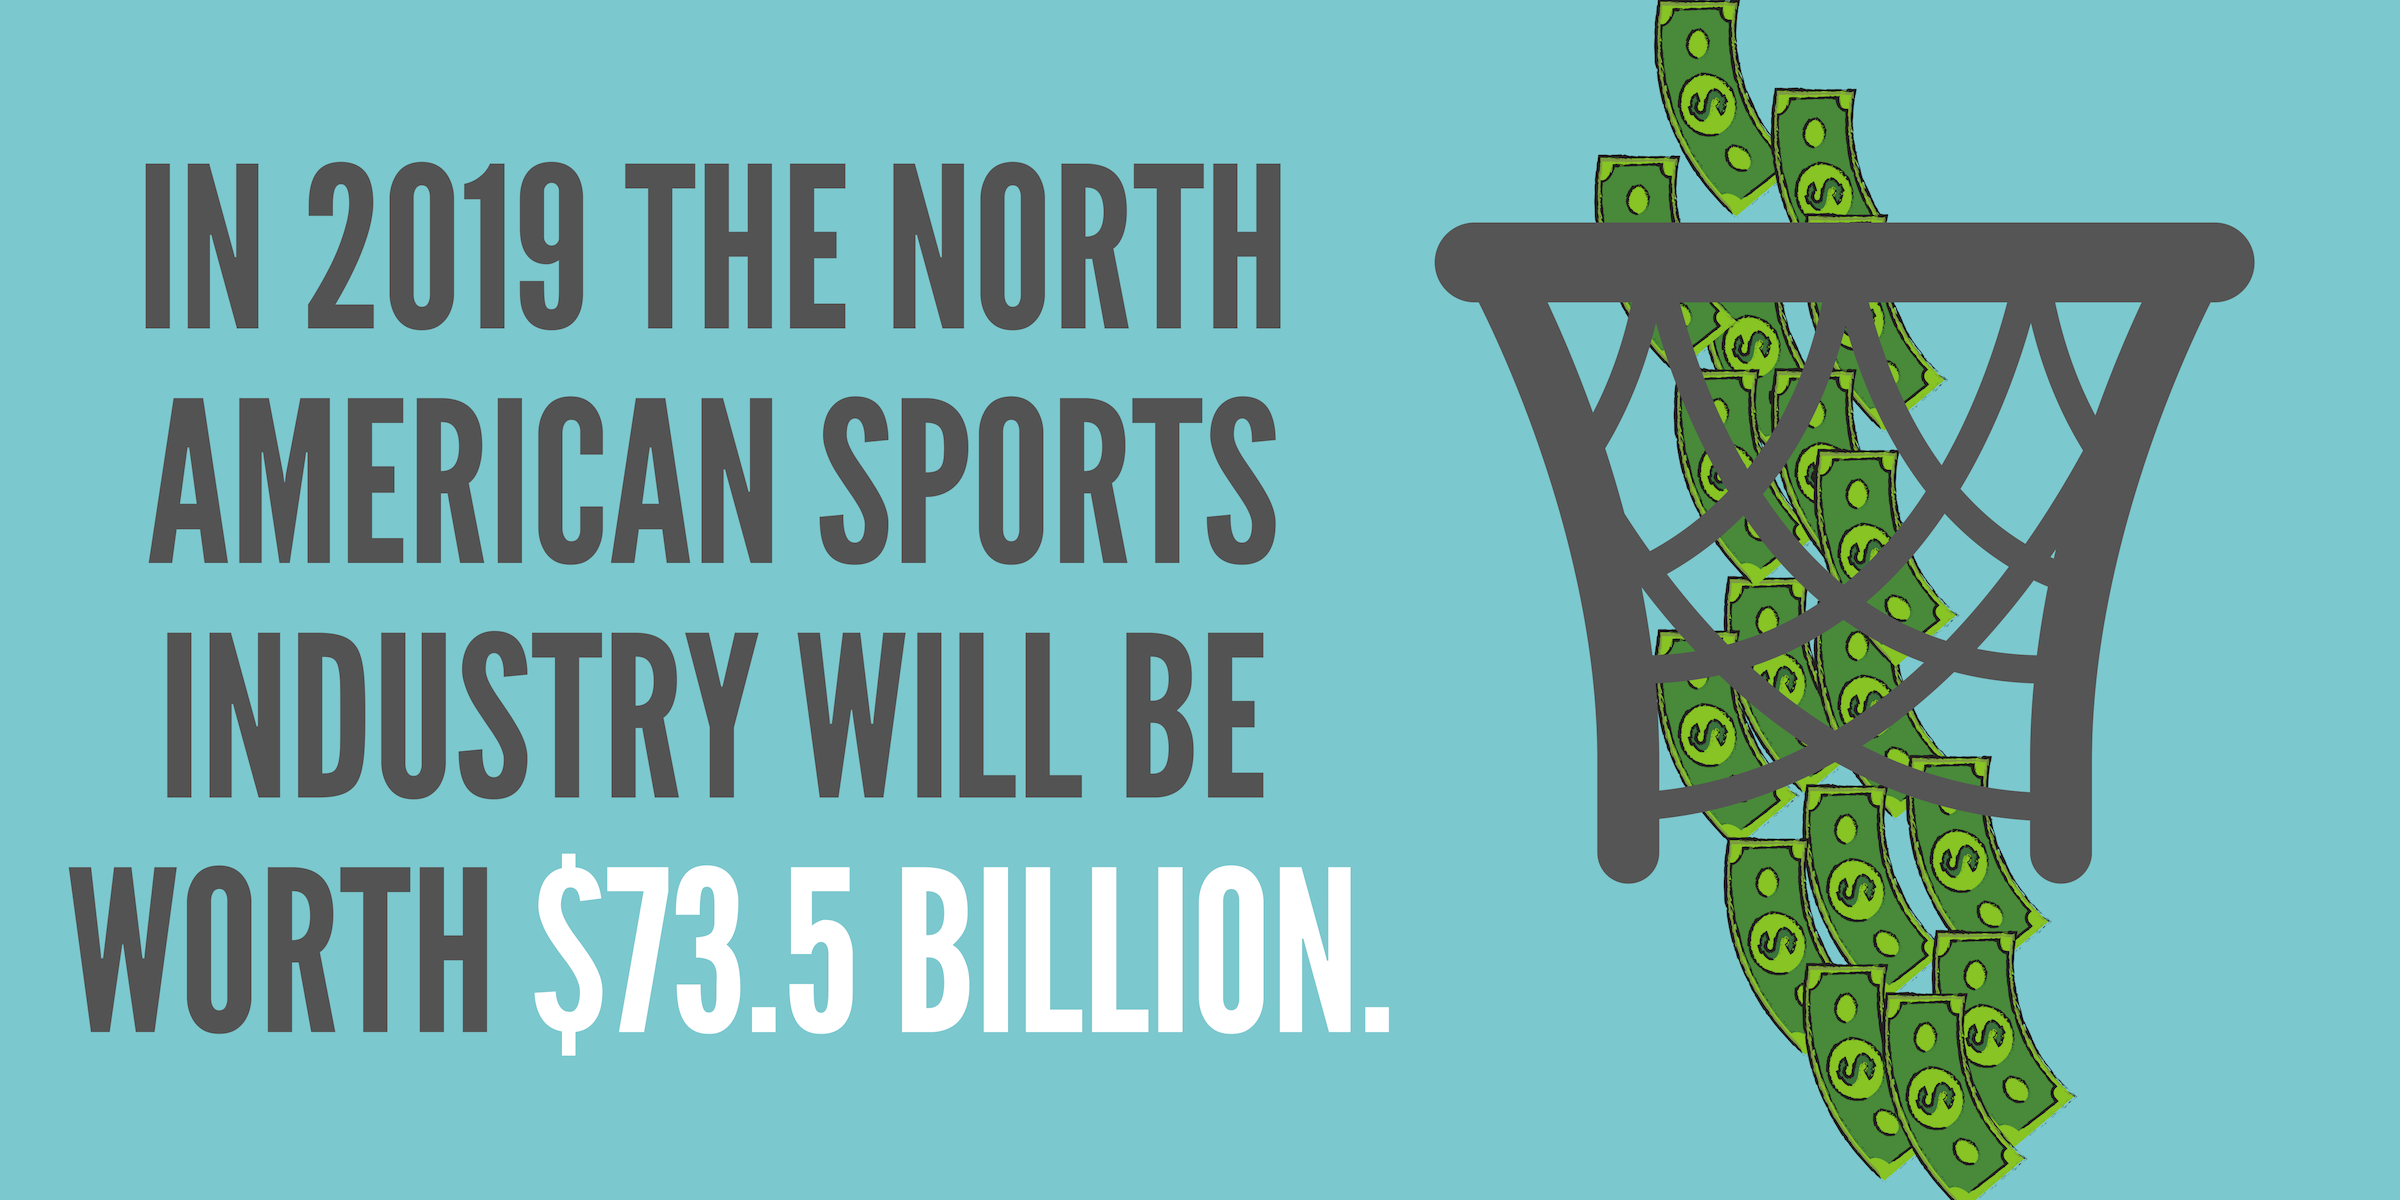 In 2019 the North American Sports Industry will be worth $73.5 Billion